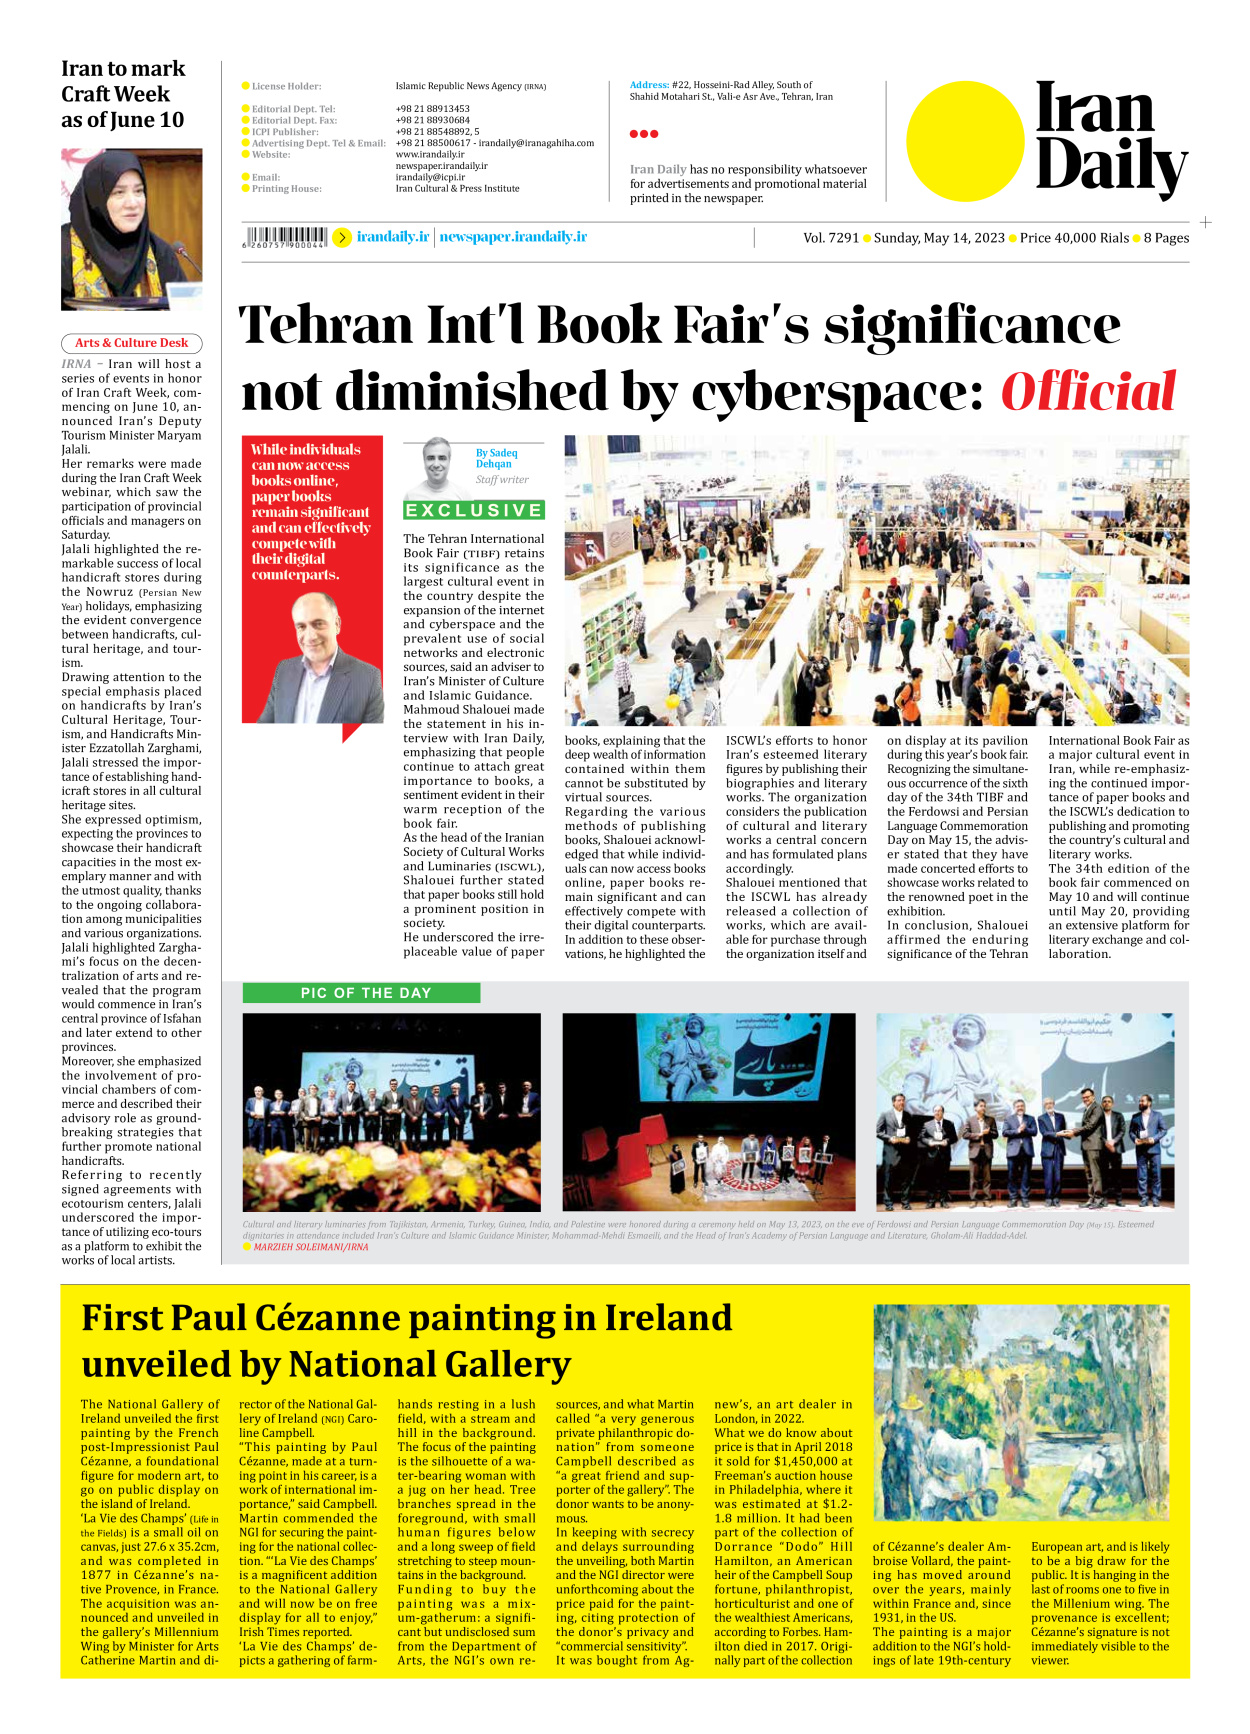 Iran Daily - Number Seven Thousand Two Hundred and Ninety One - 14 May 2023 - Page 8